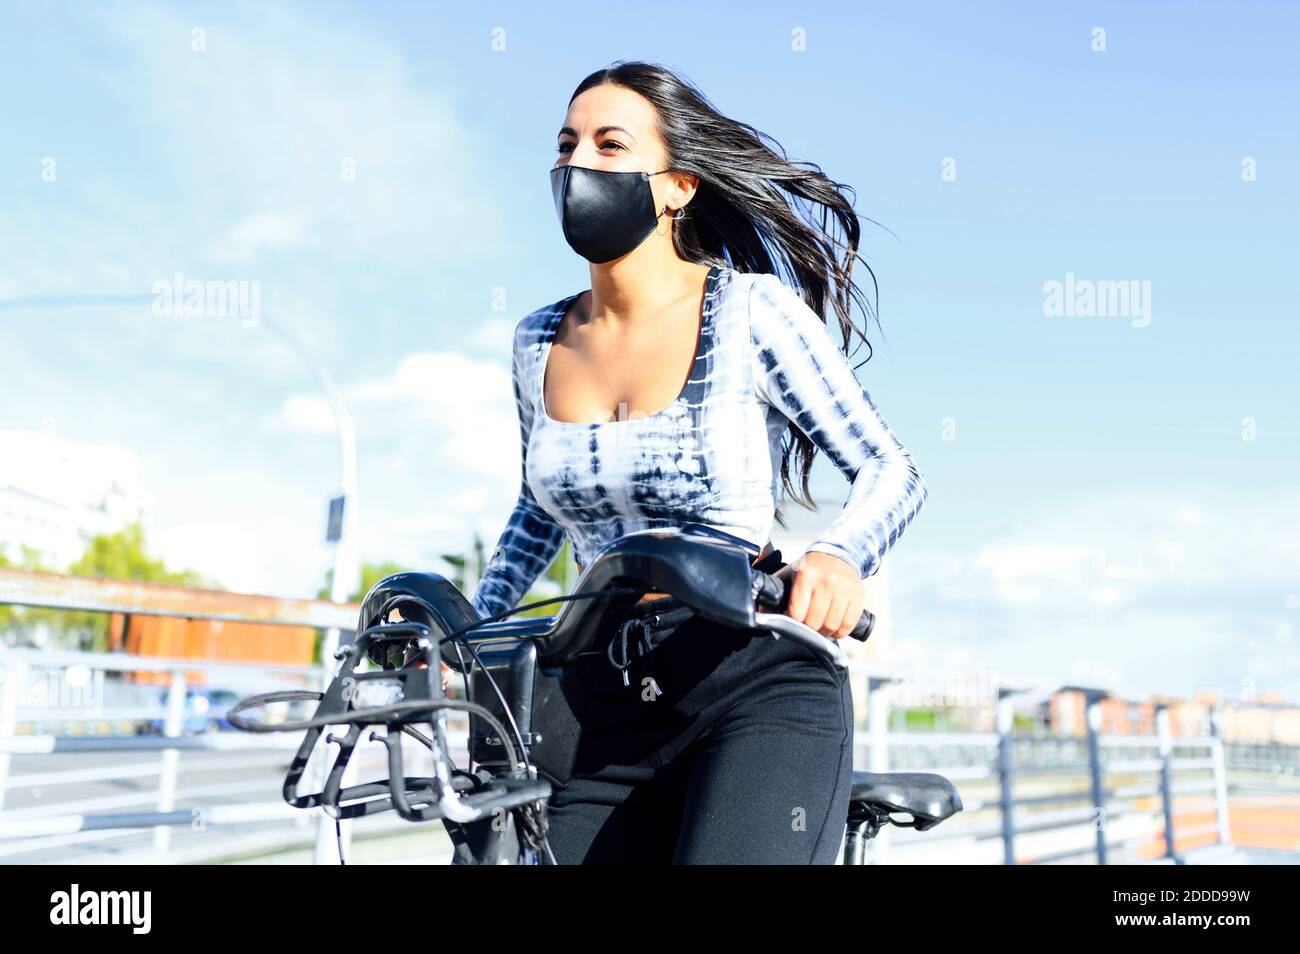 Woman wearing protective face mask cycling on bicycle during sunny day Stock Photo